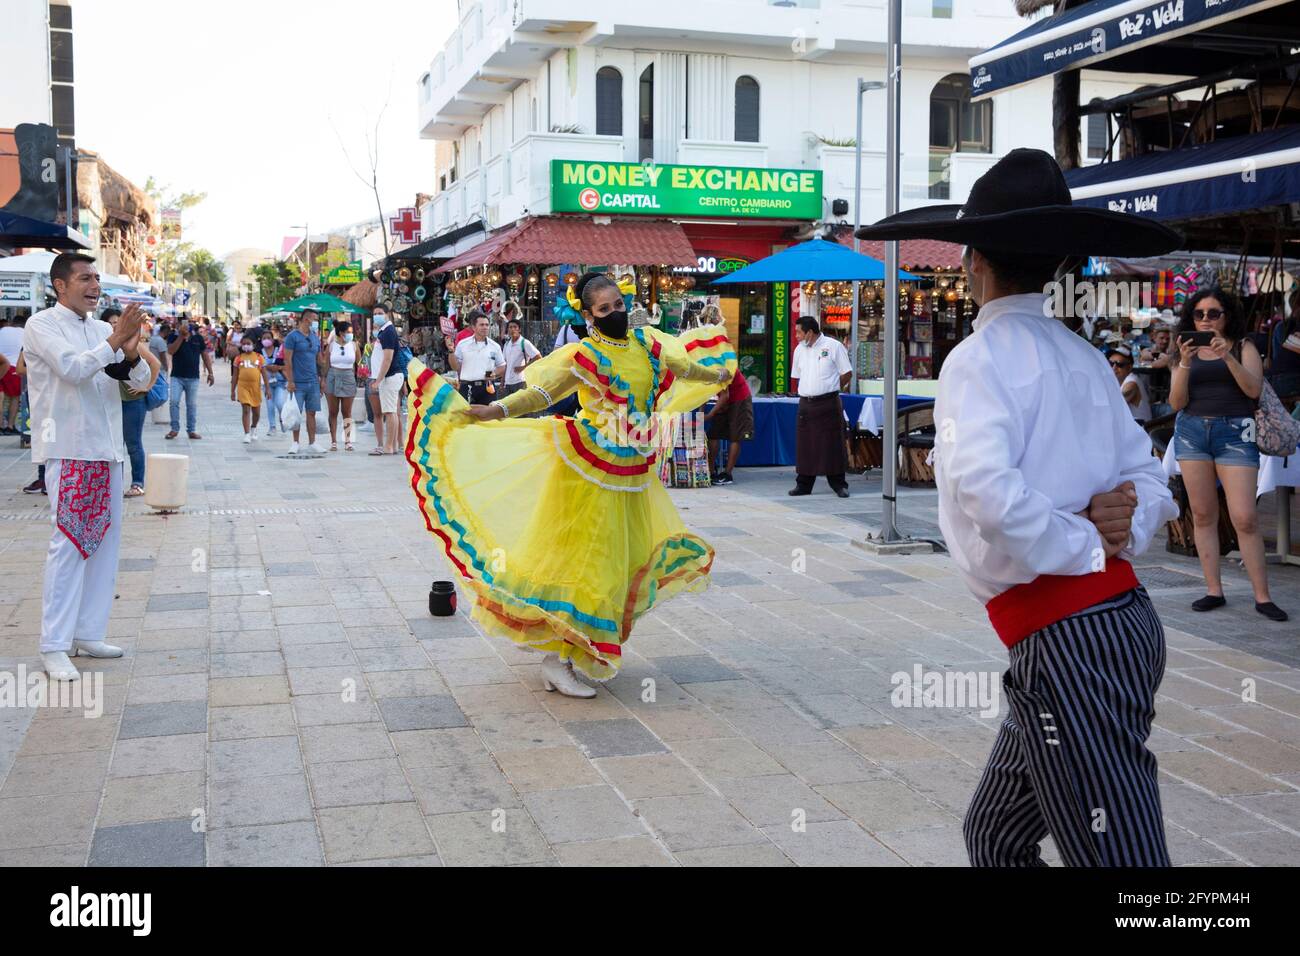 Bernardo Coca (L) and two dancers perform on the 5th Avenue amid the coronavirus pandemic in Playa del Carmen, Quintana Roo state, Mexico, on April 30, 2021. Bernardo and his colleagues lost their jobs in the entertainment industry during the coronavirus outbreak in March 2020. As they remain unemployed, they are forced to perform on the streets to make a living. Mexico is one of the countries hardest hit by the pandemic. The state of Quintana Roo has confirmed nearly 26,000 positive cases. Limited testing means actual numbers are likely far higher. And even as tourists flock the Riviera Maya, Stock Photo